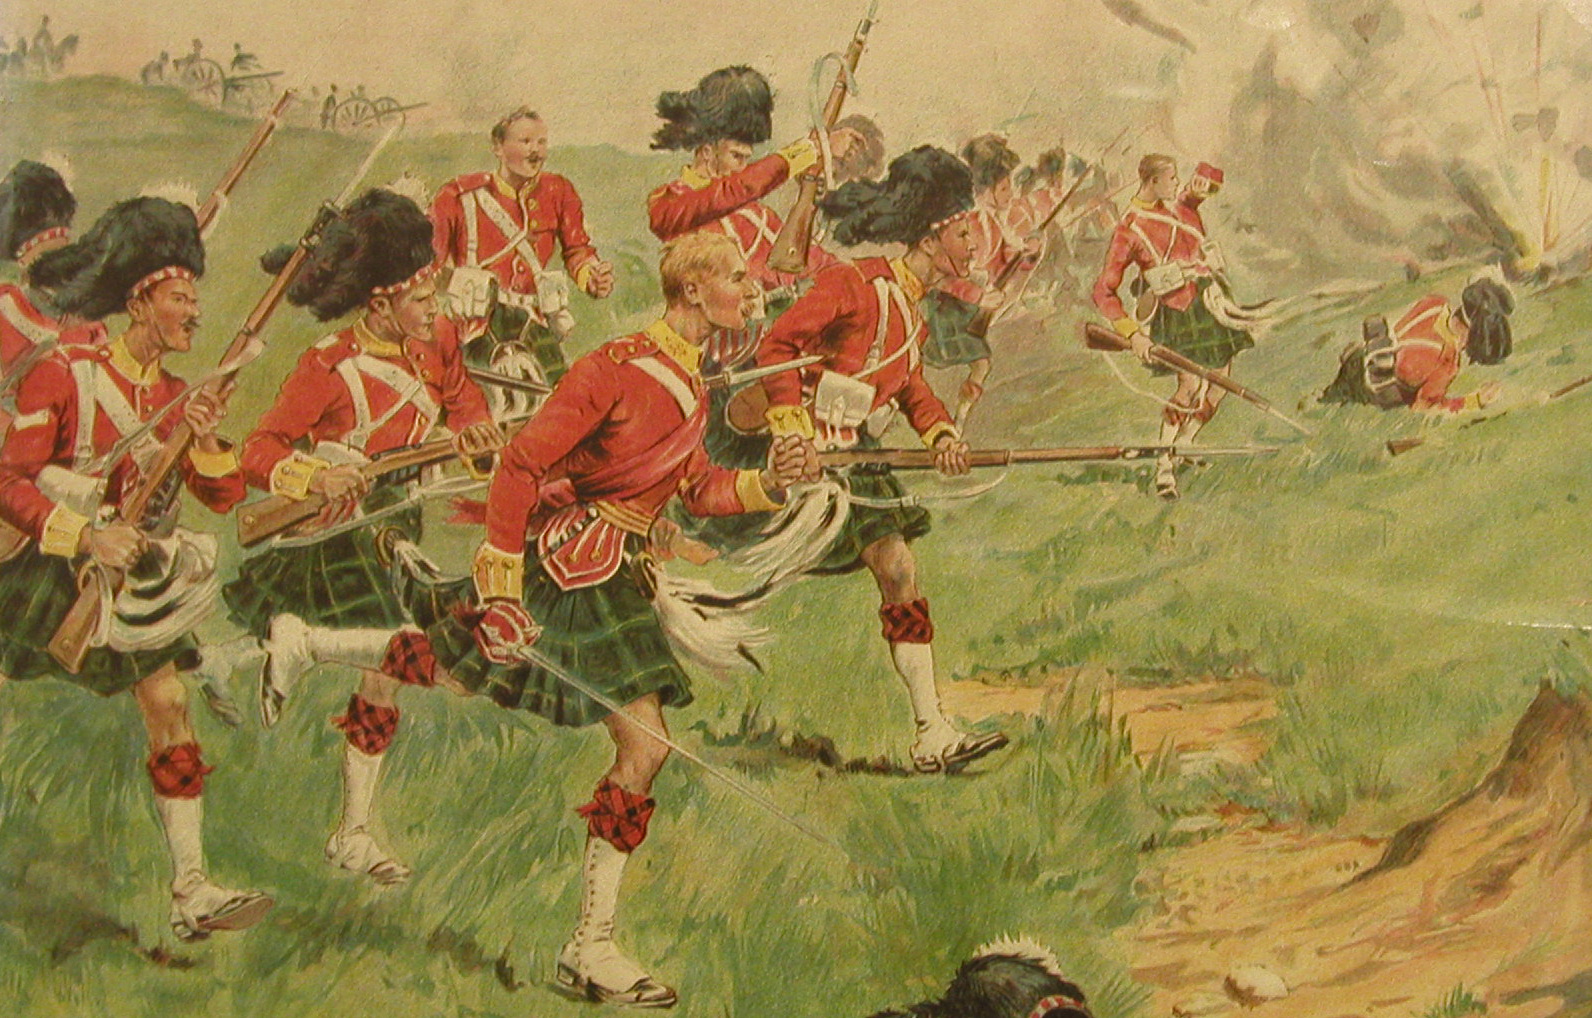 [Image: Painting of Highland regiment soldiers in Black Watch kilts and red British coats charge, in an Anglo-Boer War battle]